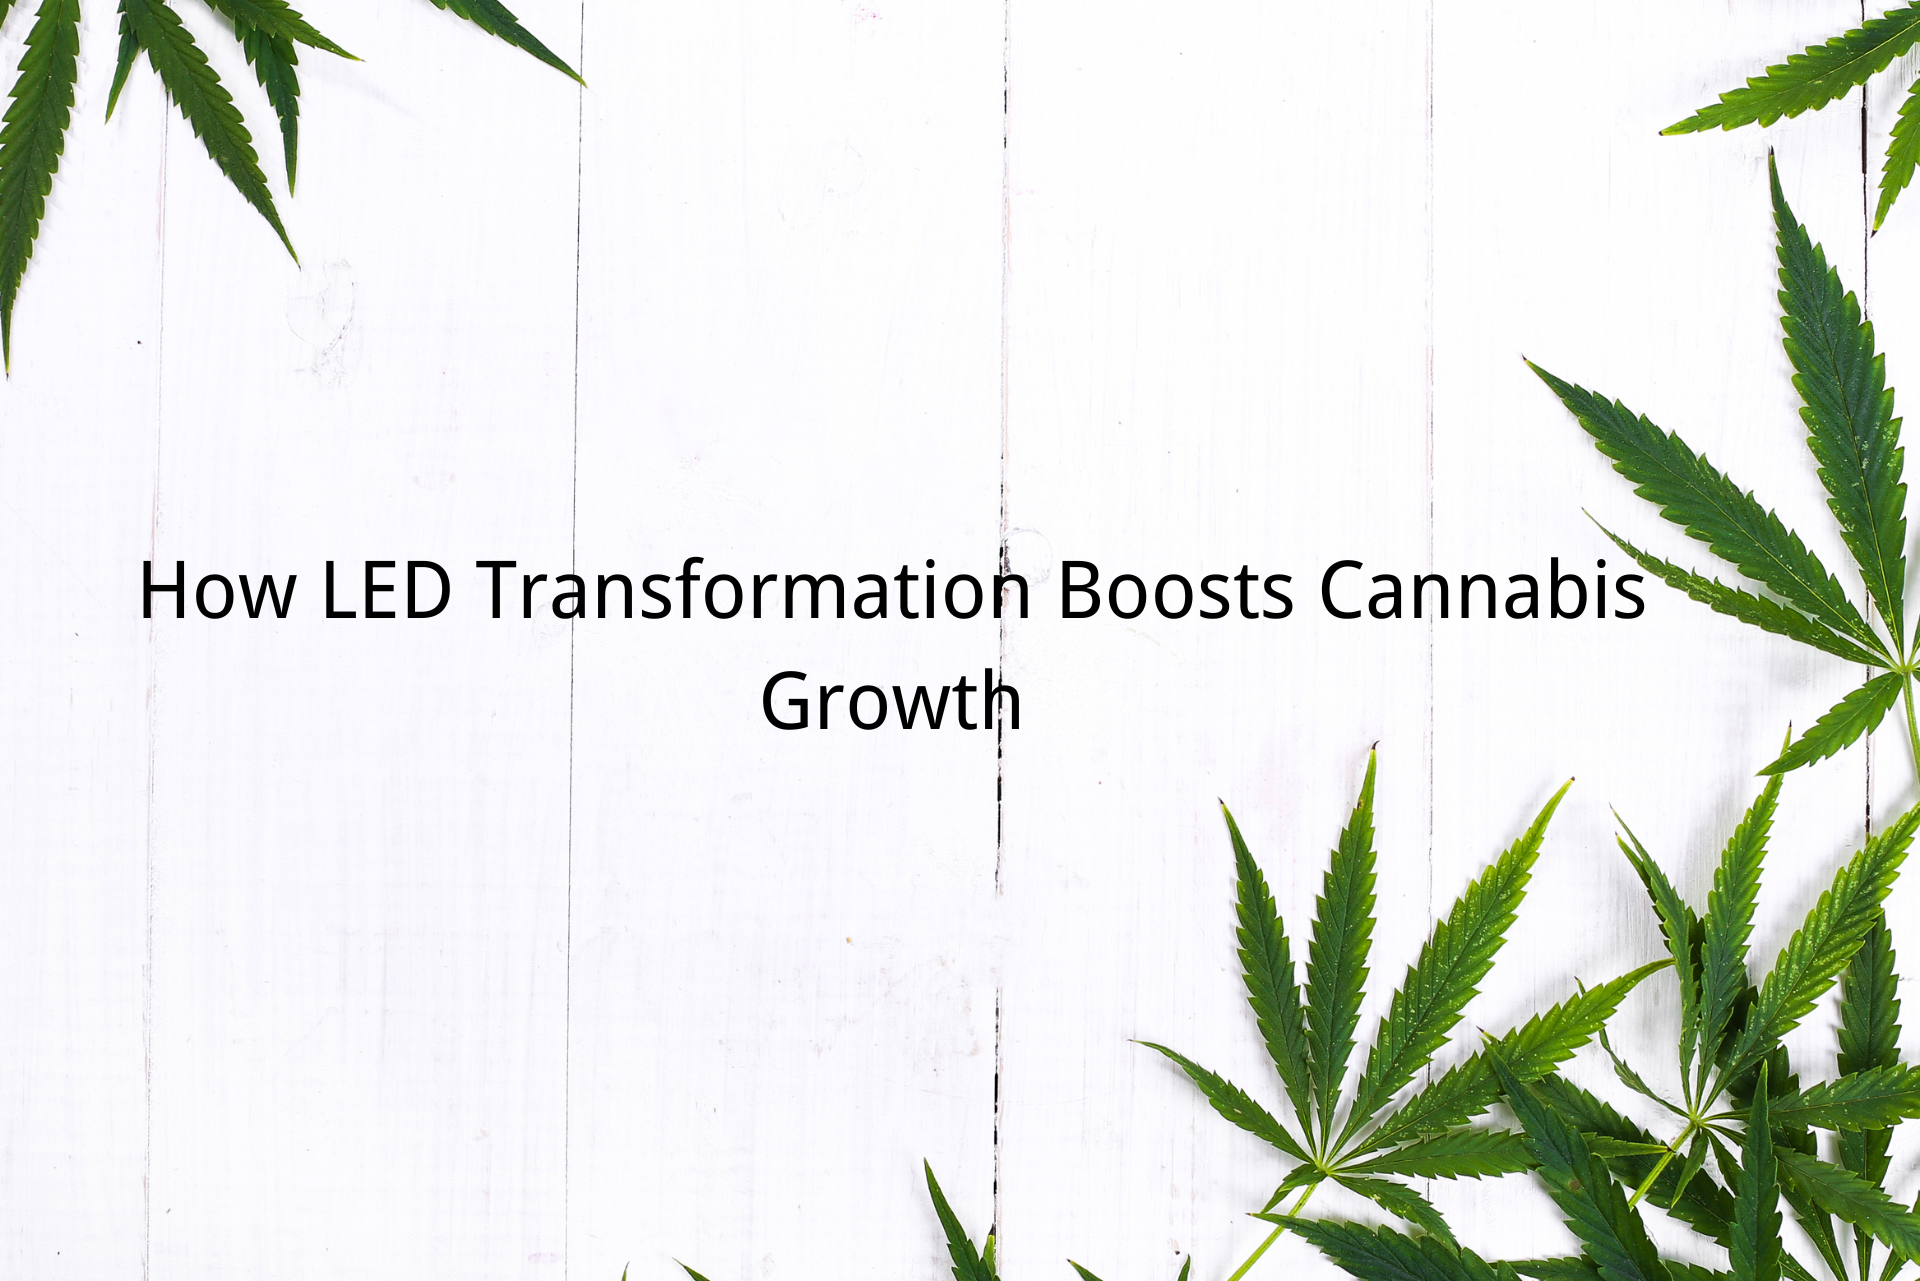 How LED Transformation Boosts Cannabis Growth